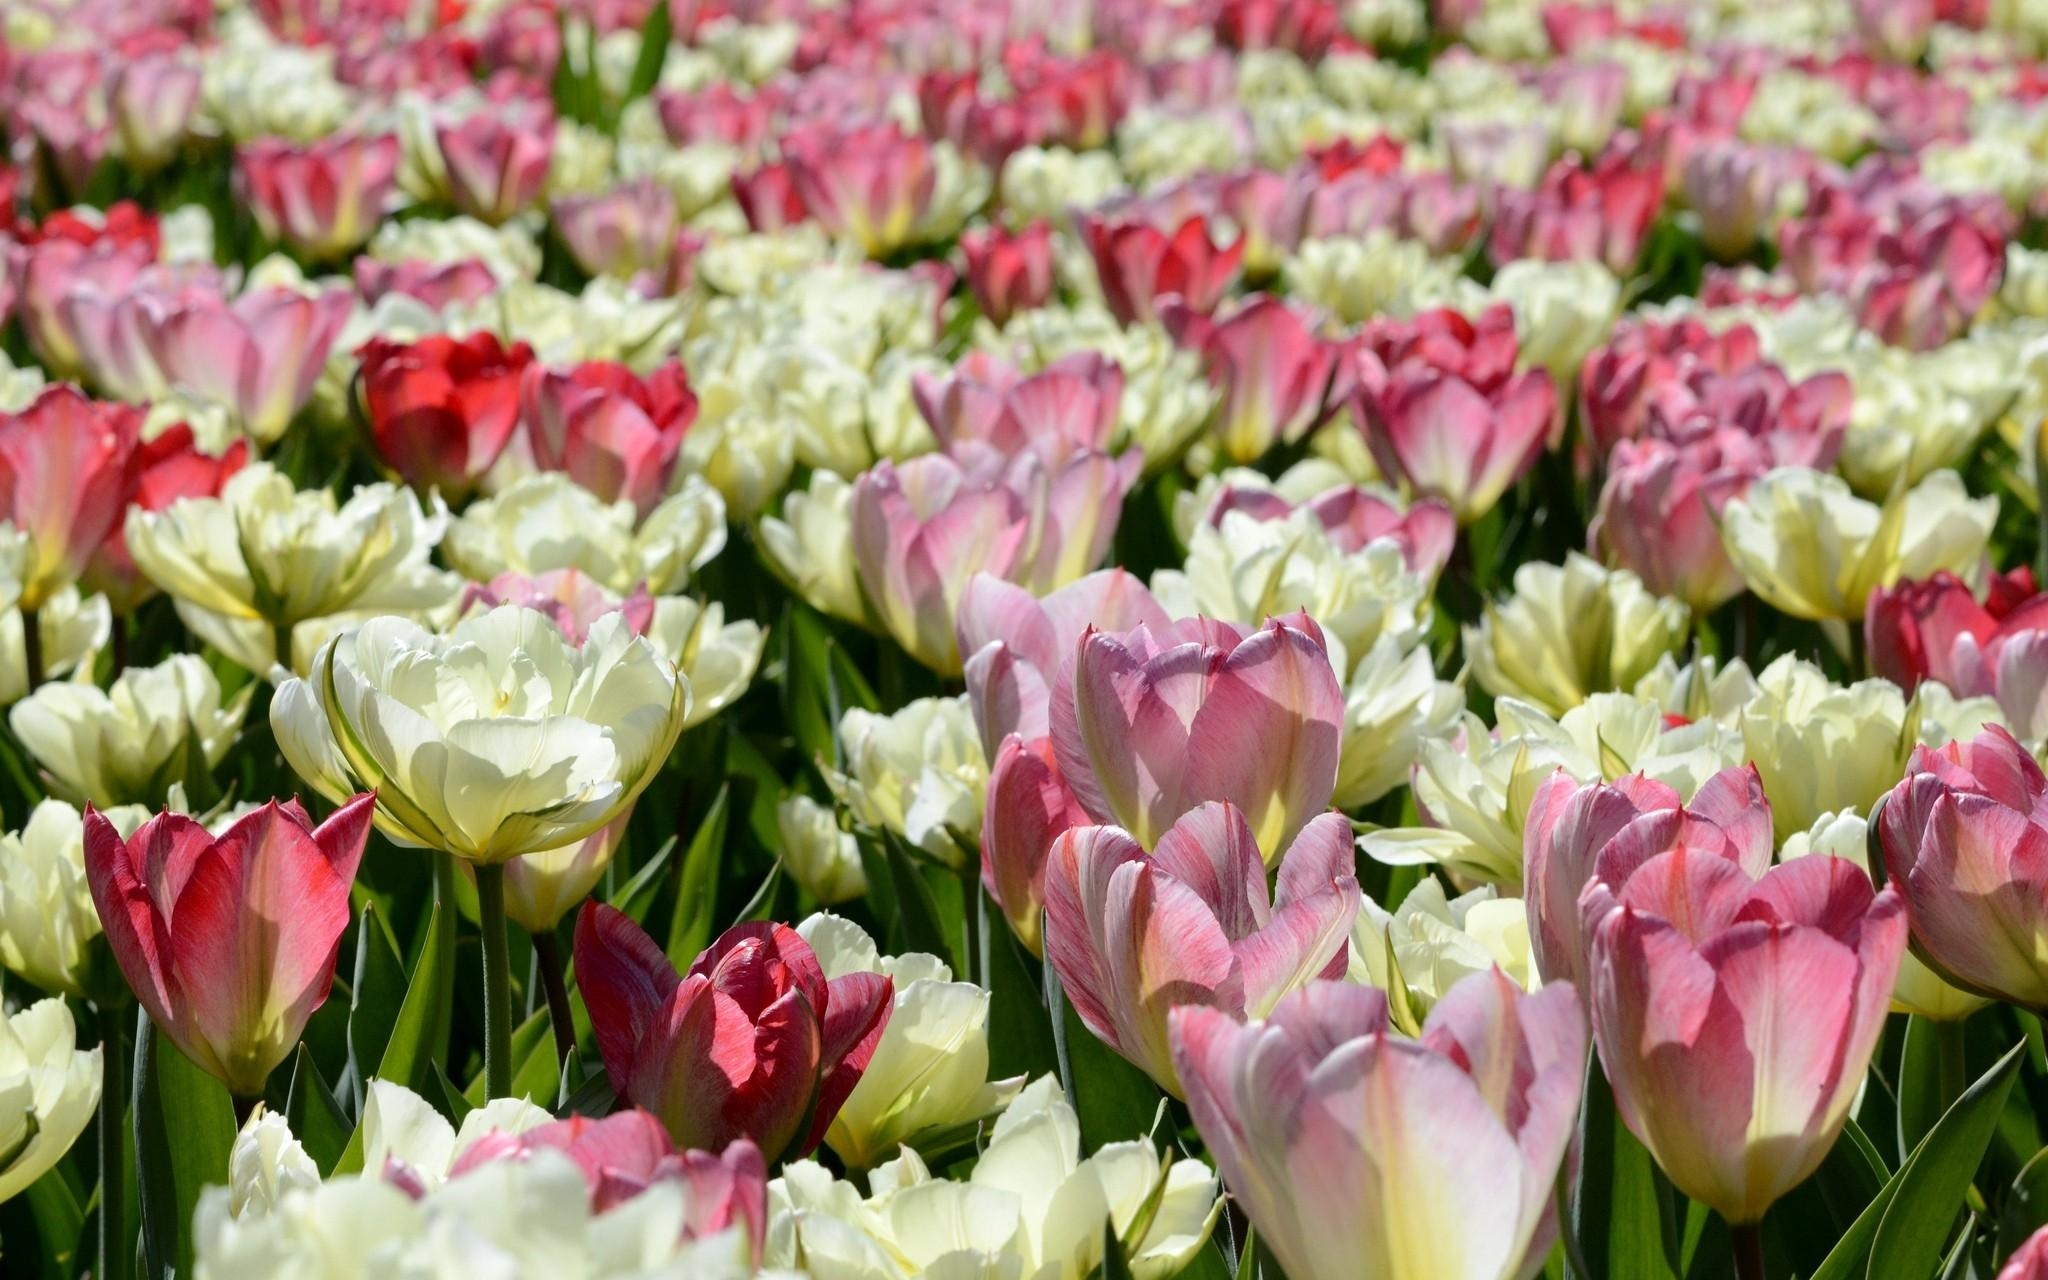 Wallpaper for mobile devices disbanded, flowers, tulips, flower bed